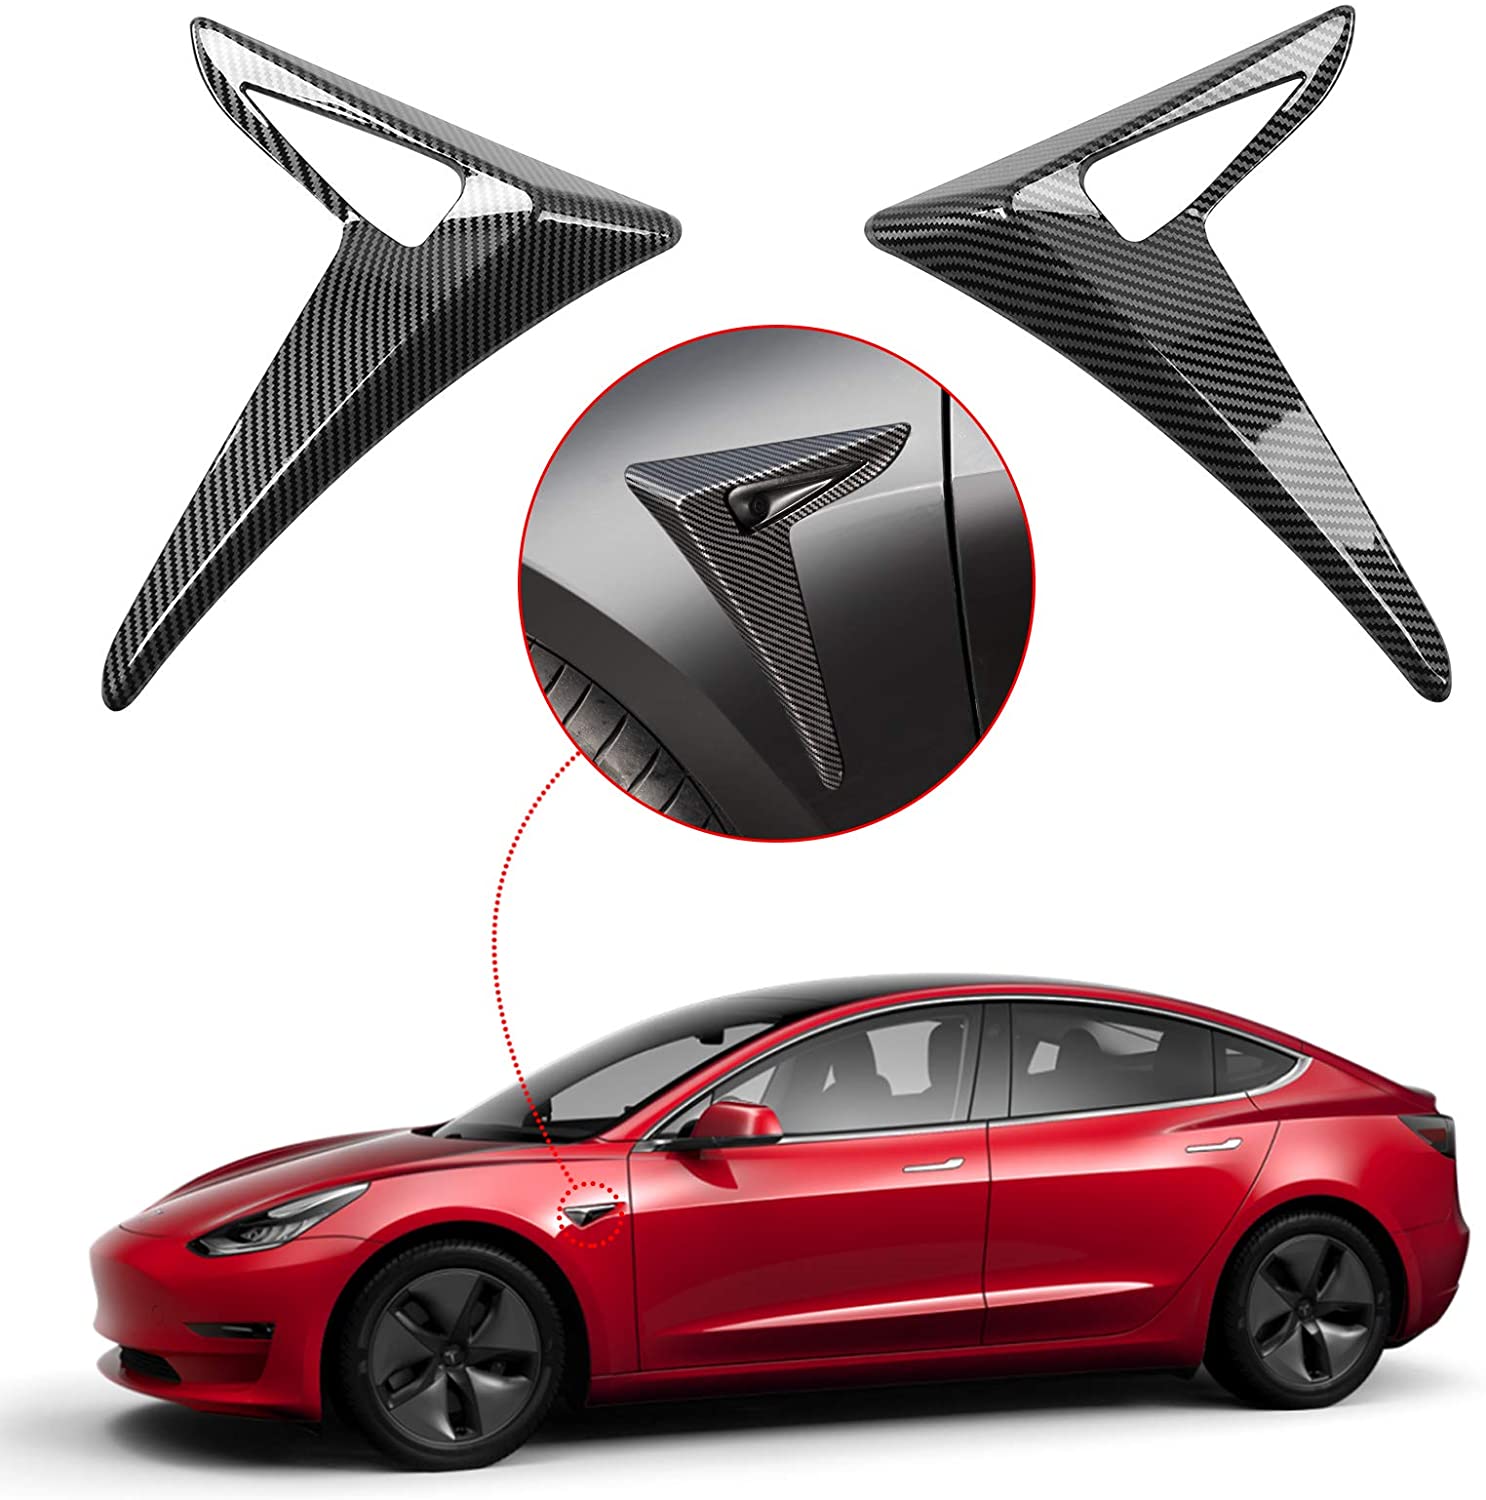 ABS Side camera cover for Tesla Model 3 2021-2023 - Tesery Official Store